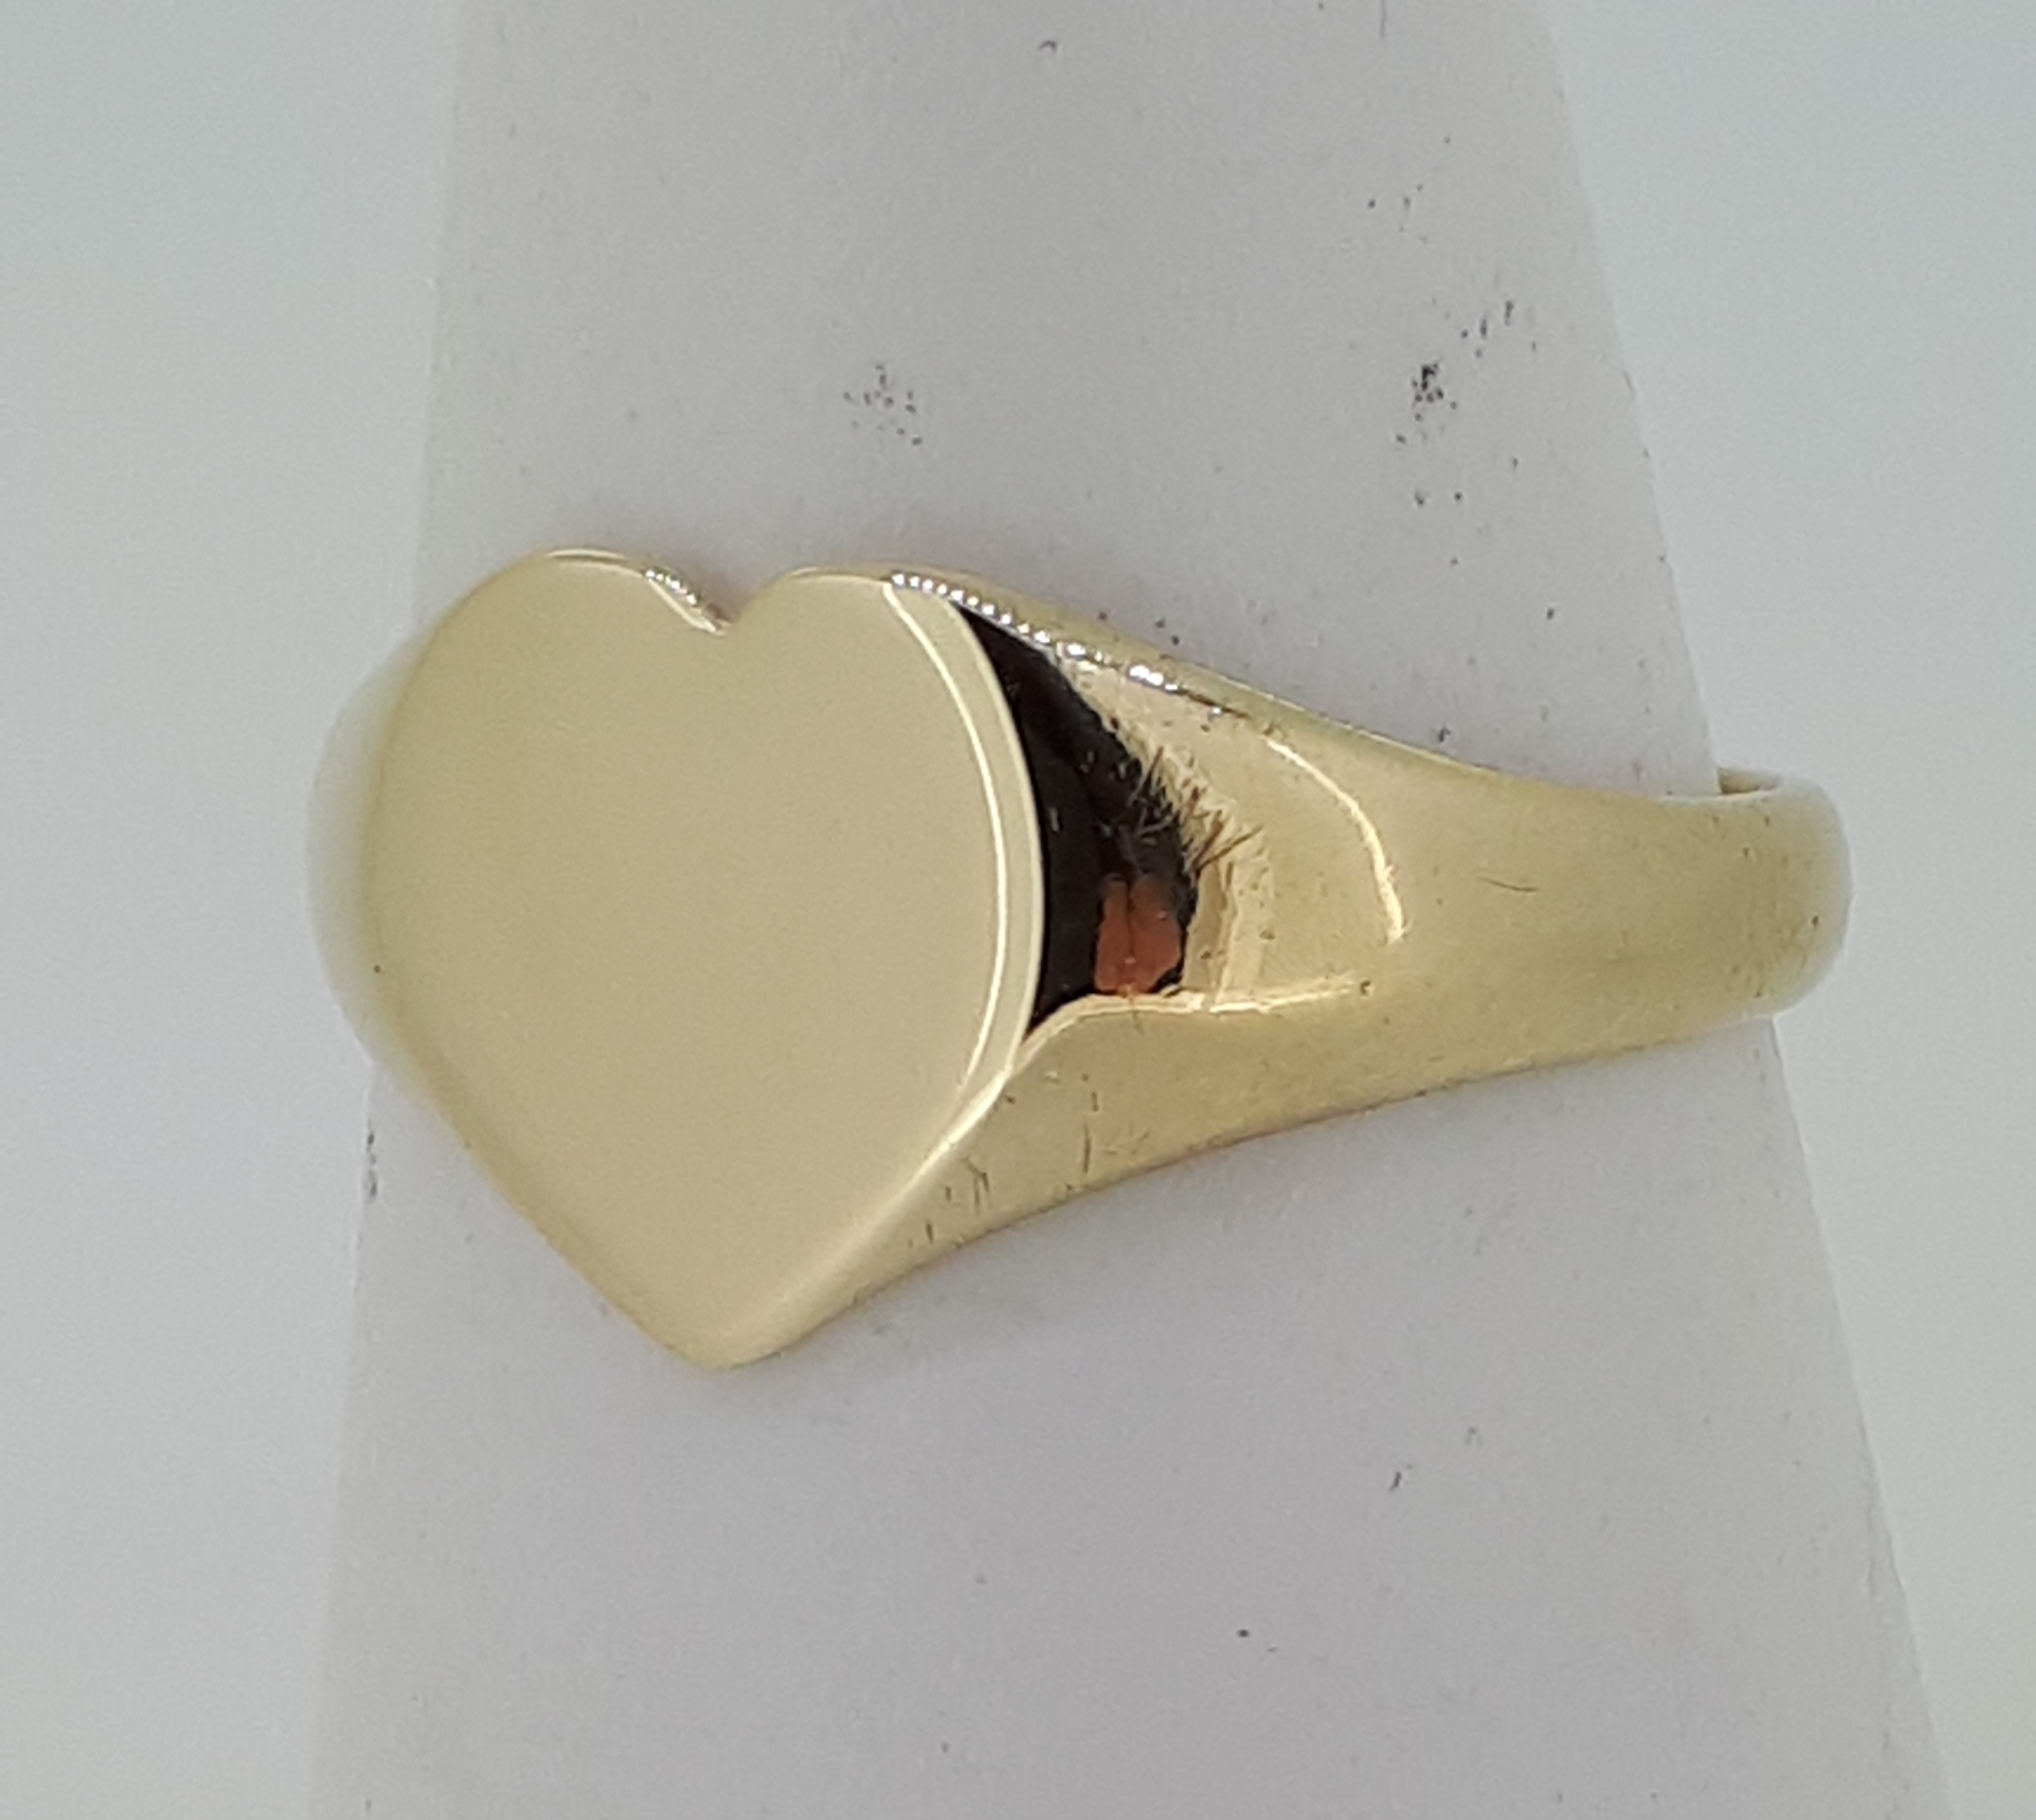 9ct (375) Yellow Gold Heart Signet Ring - Image 5 of 6